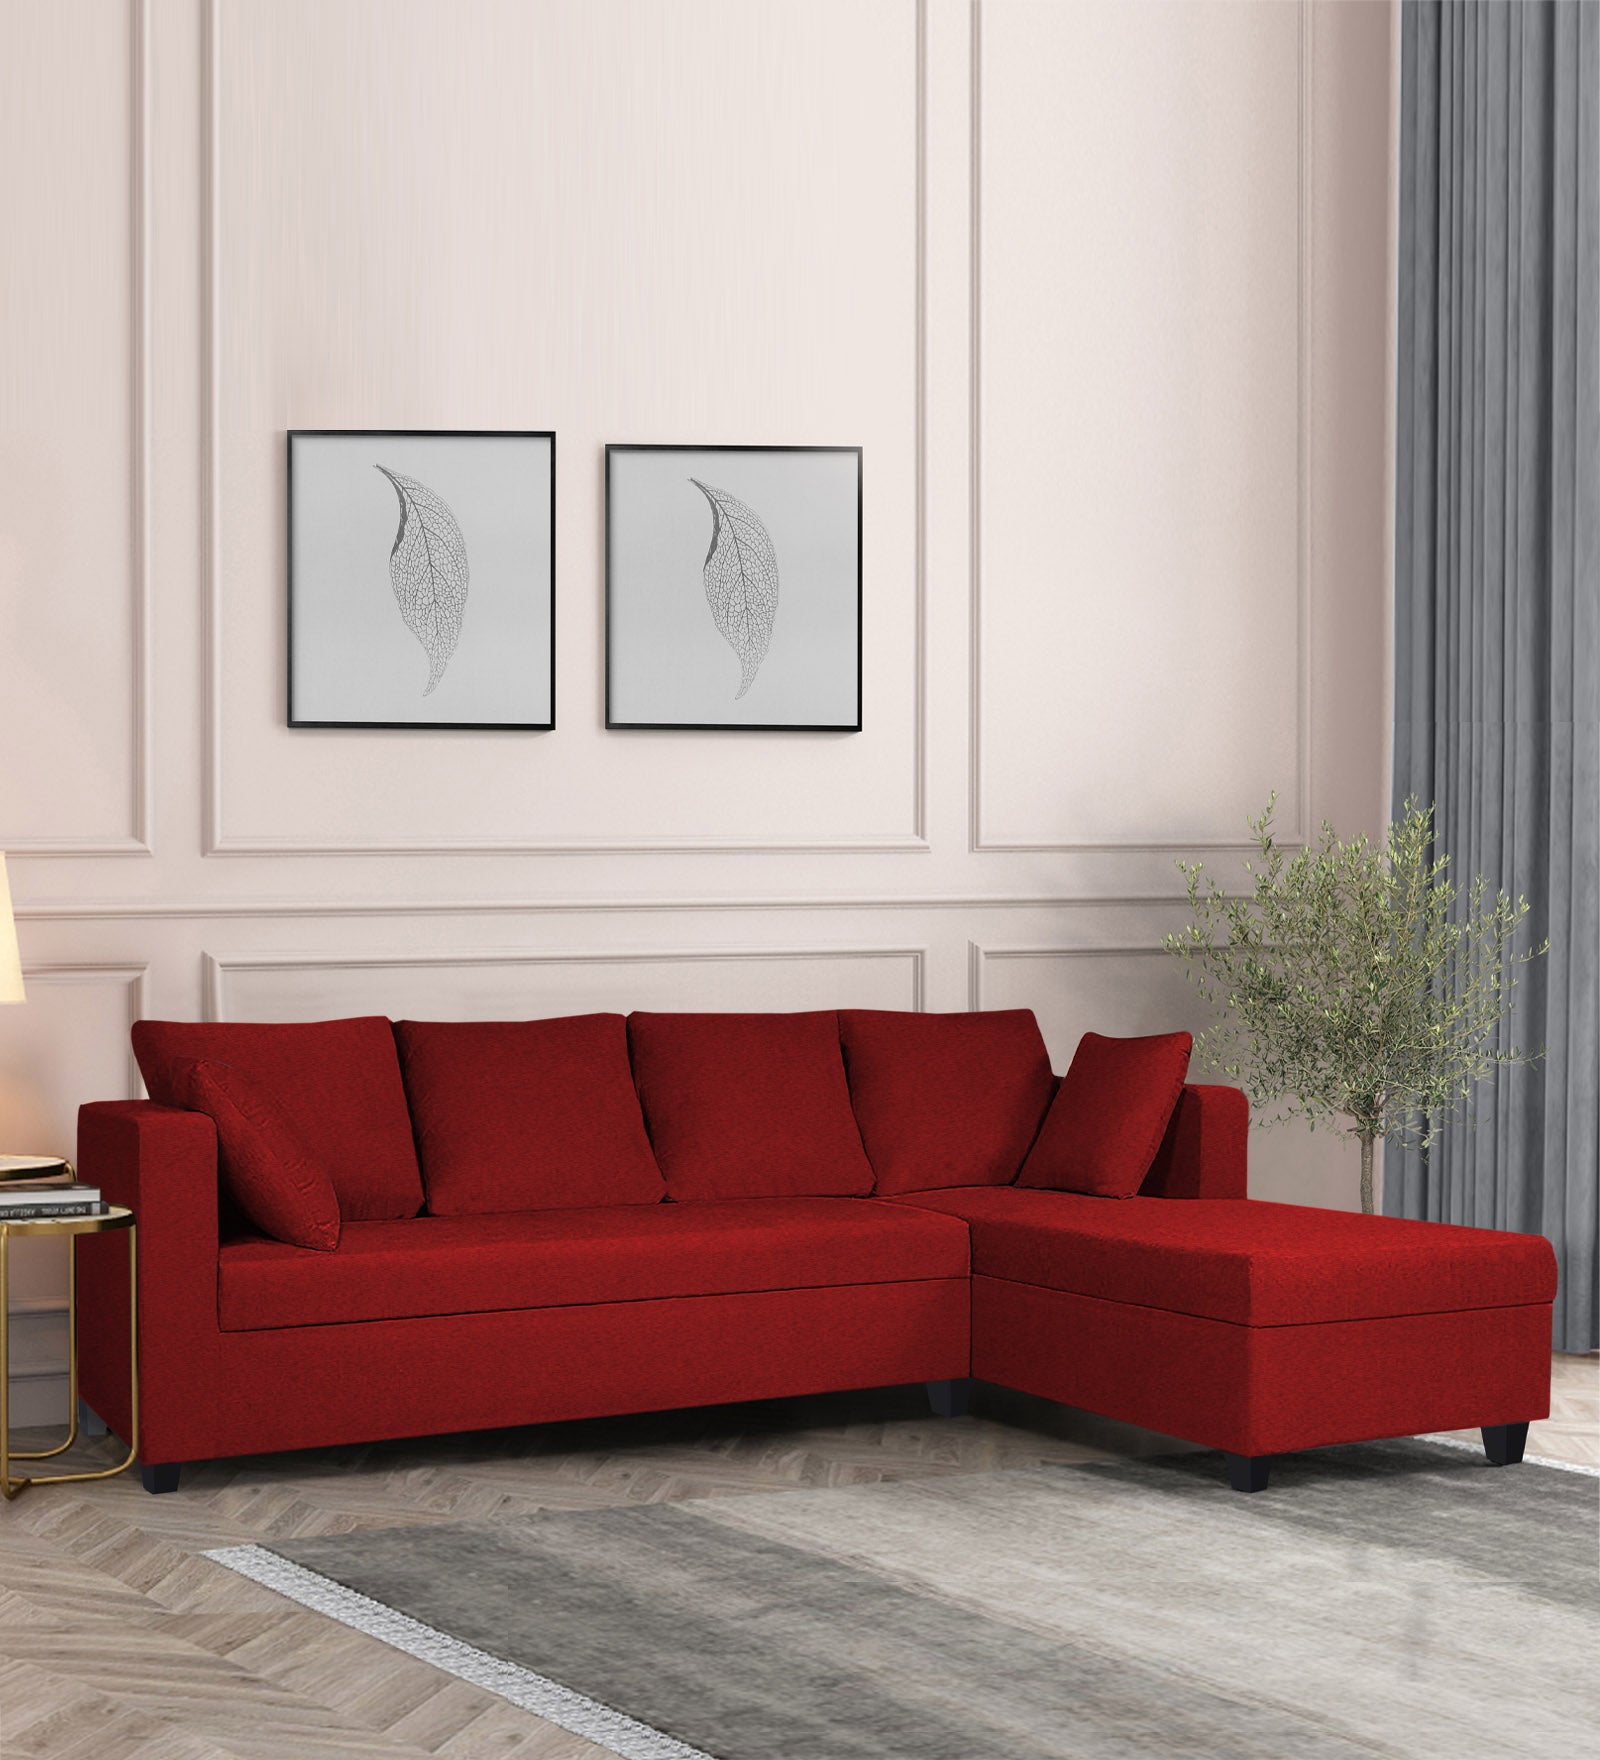 Nebula Fabric LHS Sectional Sofa (3+Lounger) in Blood Maroon Colour